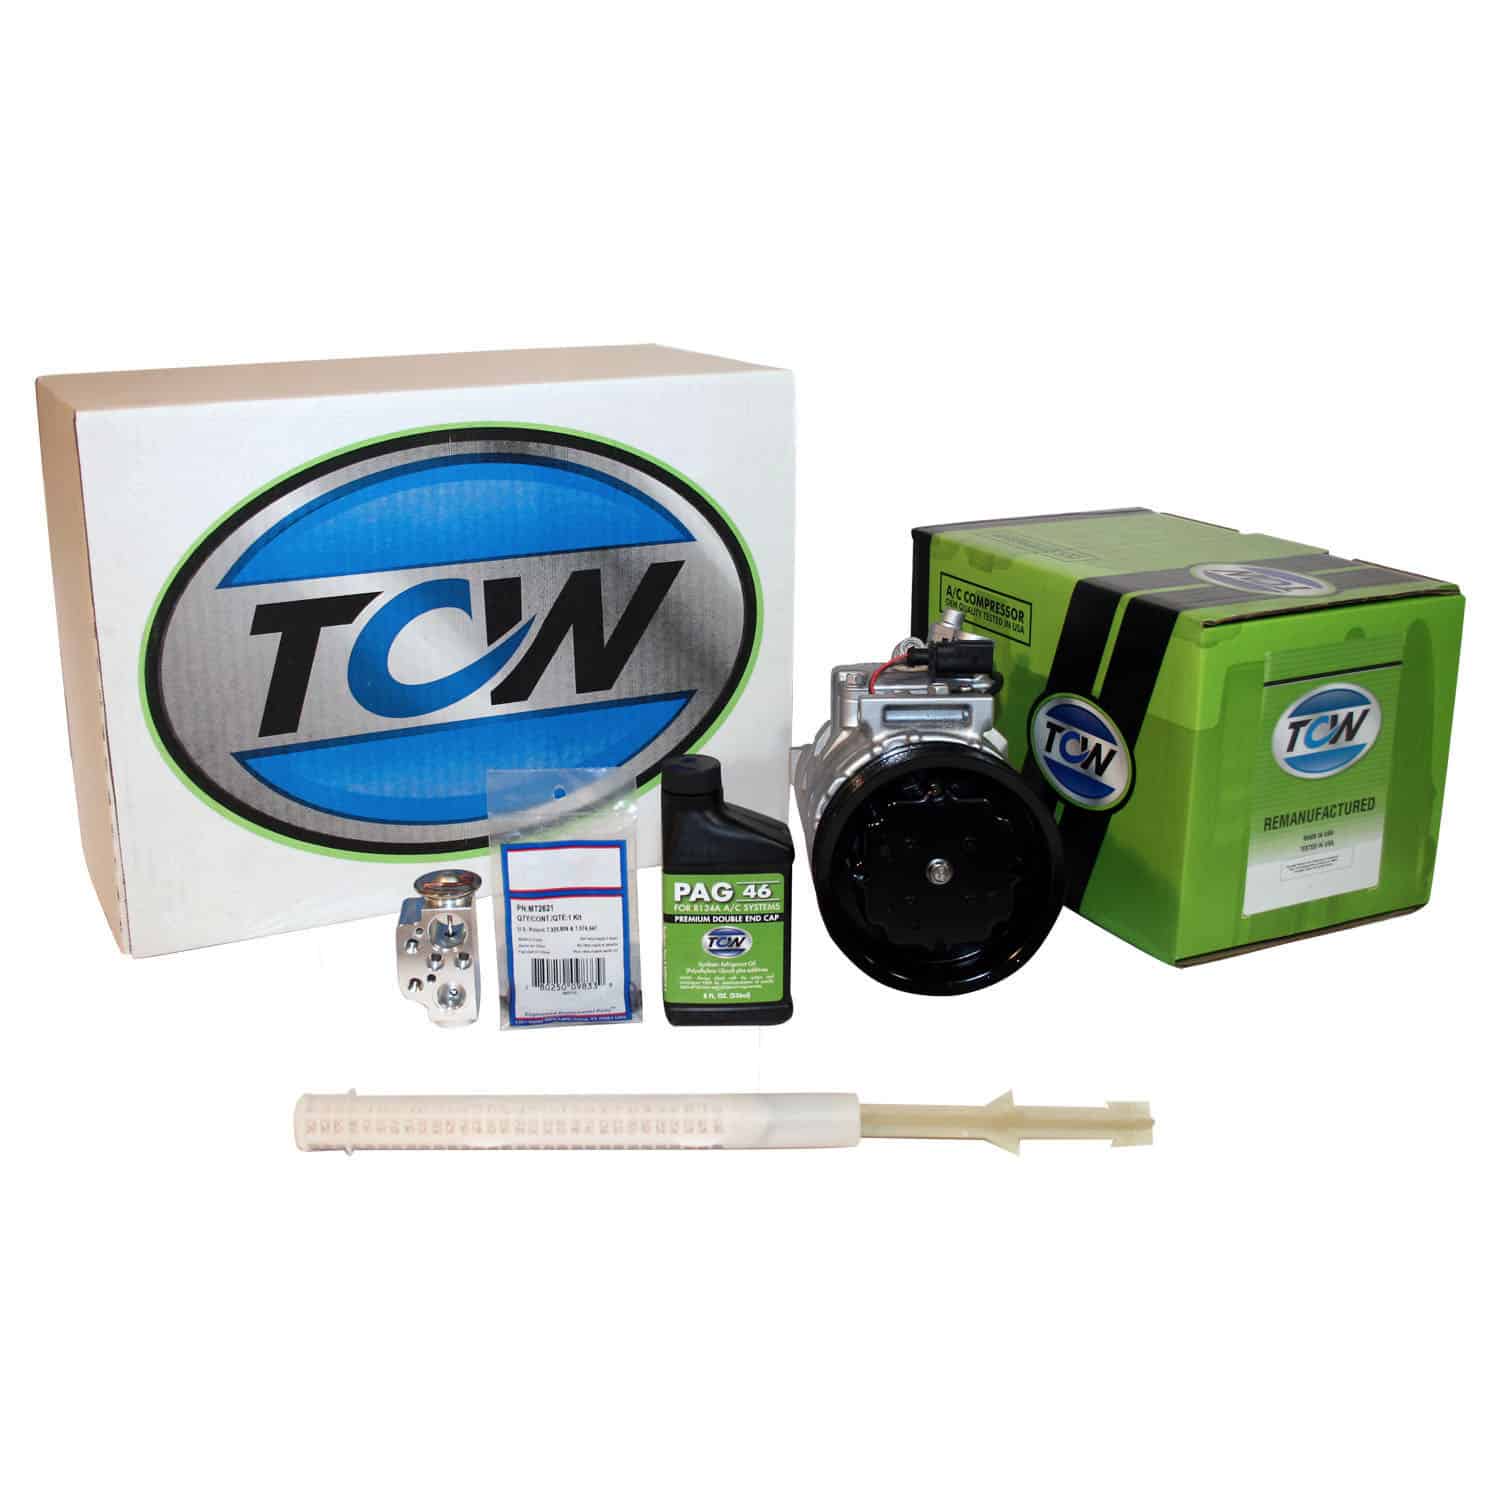 TCW Vehicle A/C Kit K1000421R Remanufactured Product Image field_60b6a13a6e67c